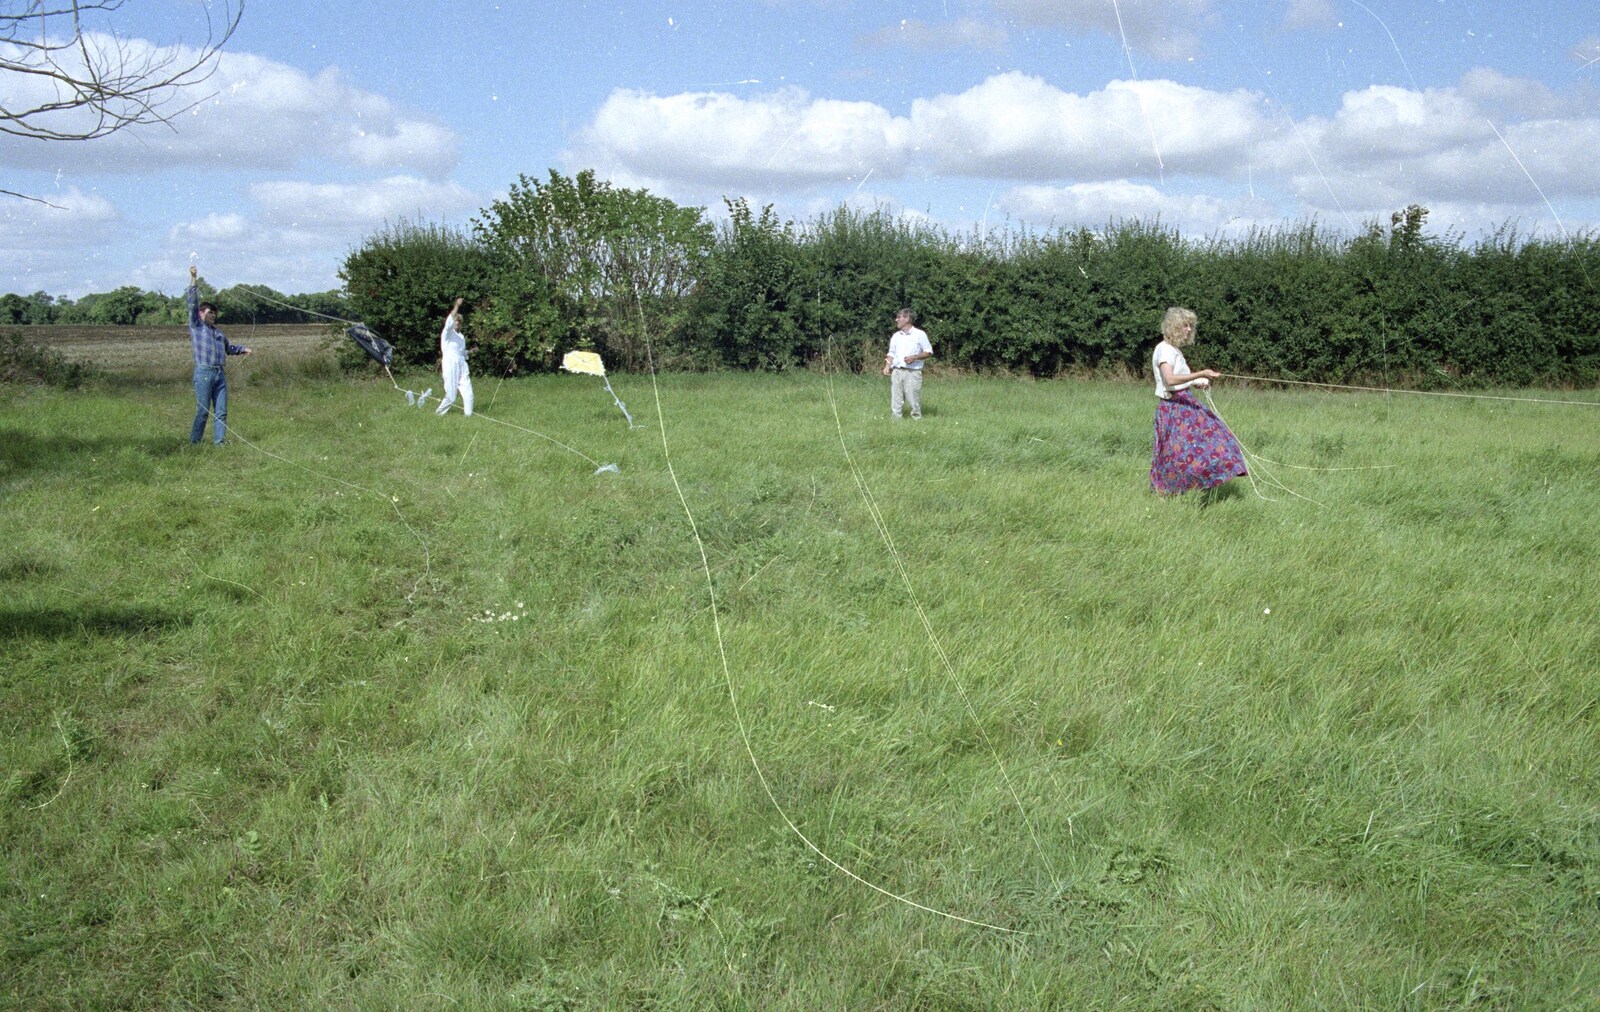 Kite flying is attempted from Kite Flying, and an Introduction to BPCC Printec, Diss, Norfolk - 3rd August 1989